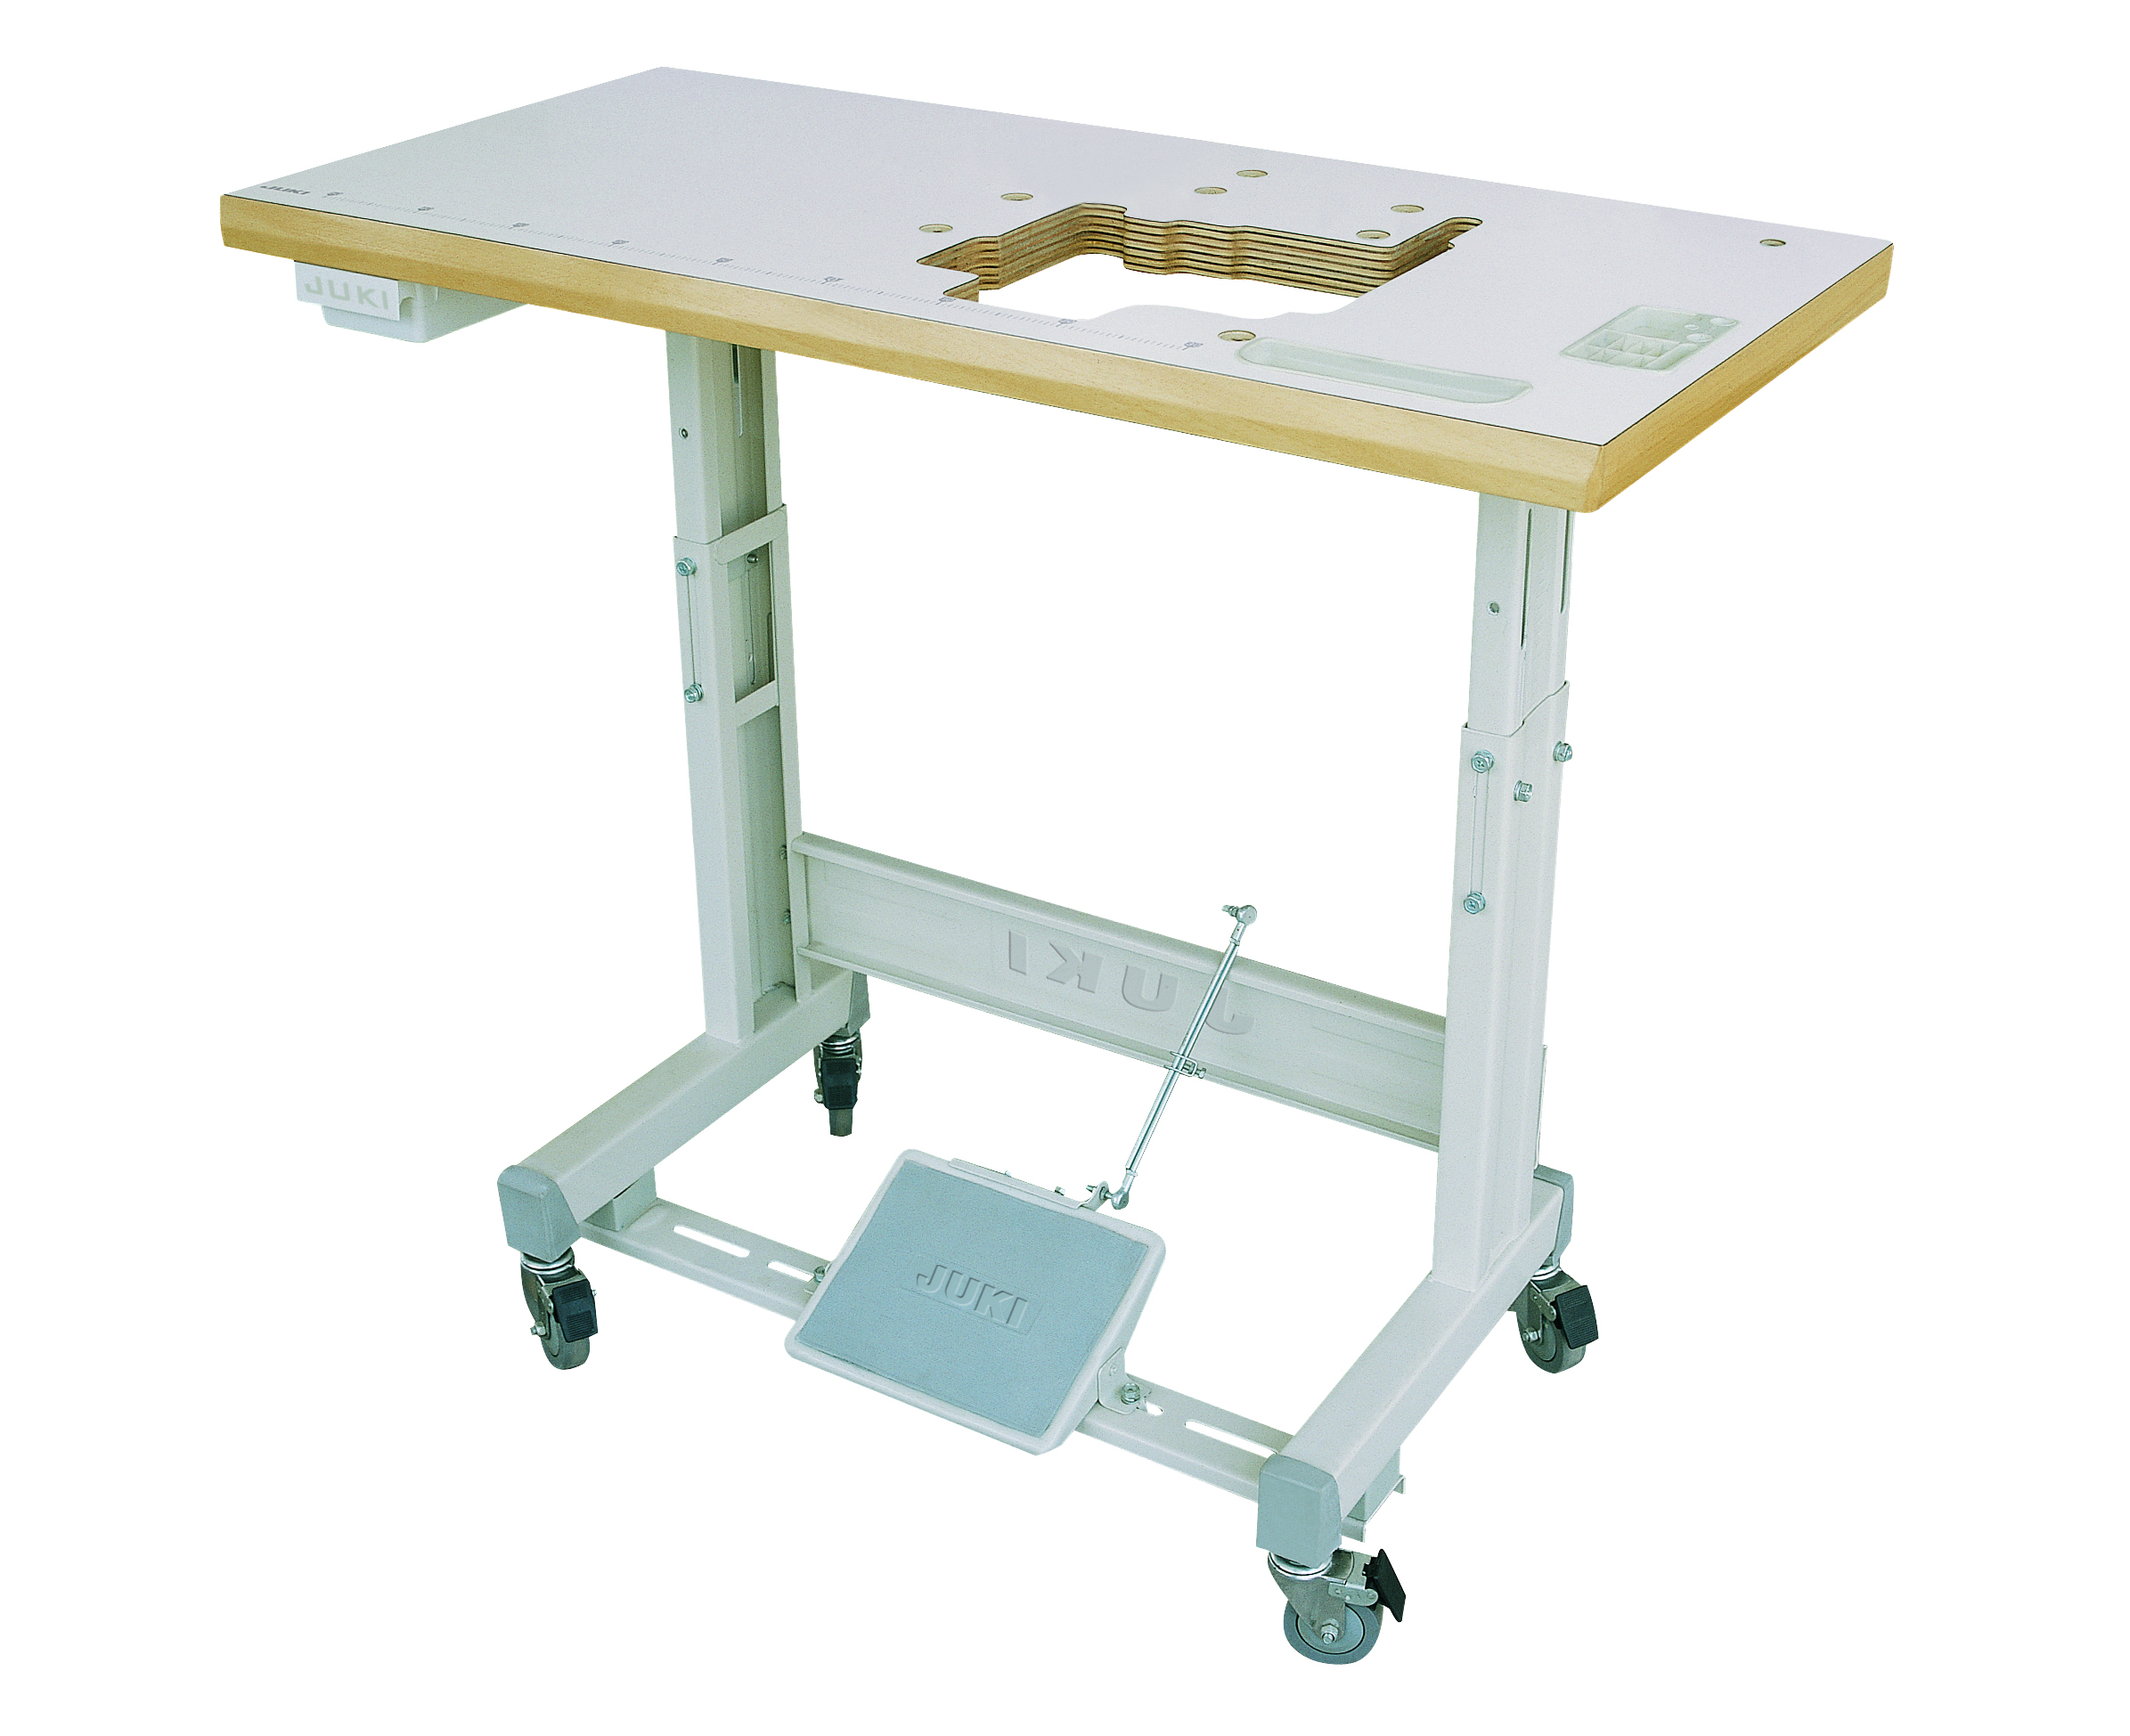 Custom-made working stand and tables for sewing machine